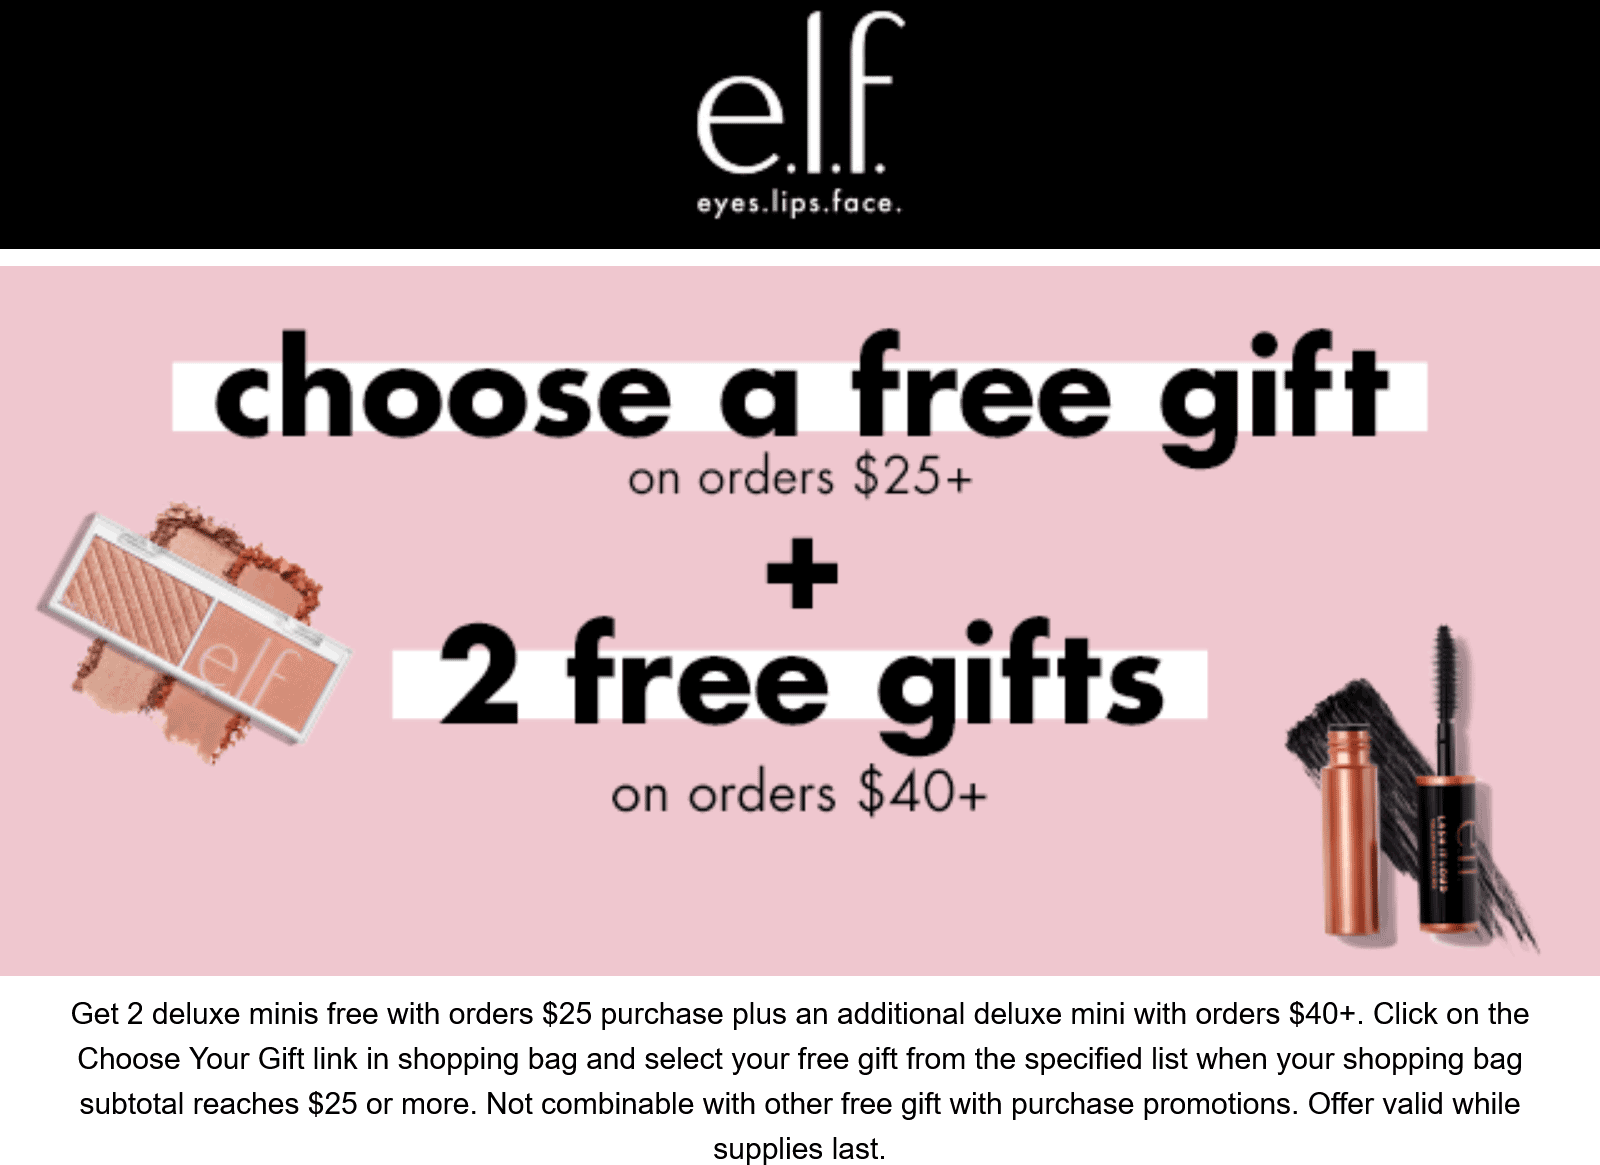 e.l.f. Cosmetics stores Coupon  2-3 free deluxe minis with $25+ at e.l.f. Cosmetics #elfcosmetics 